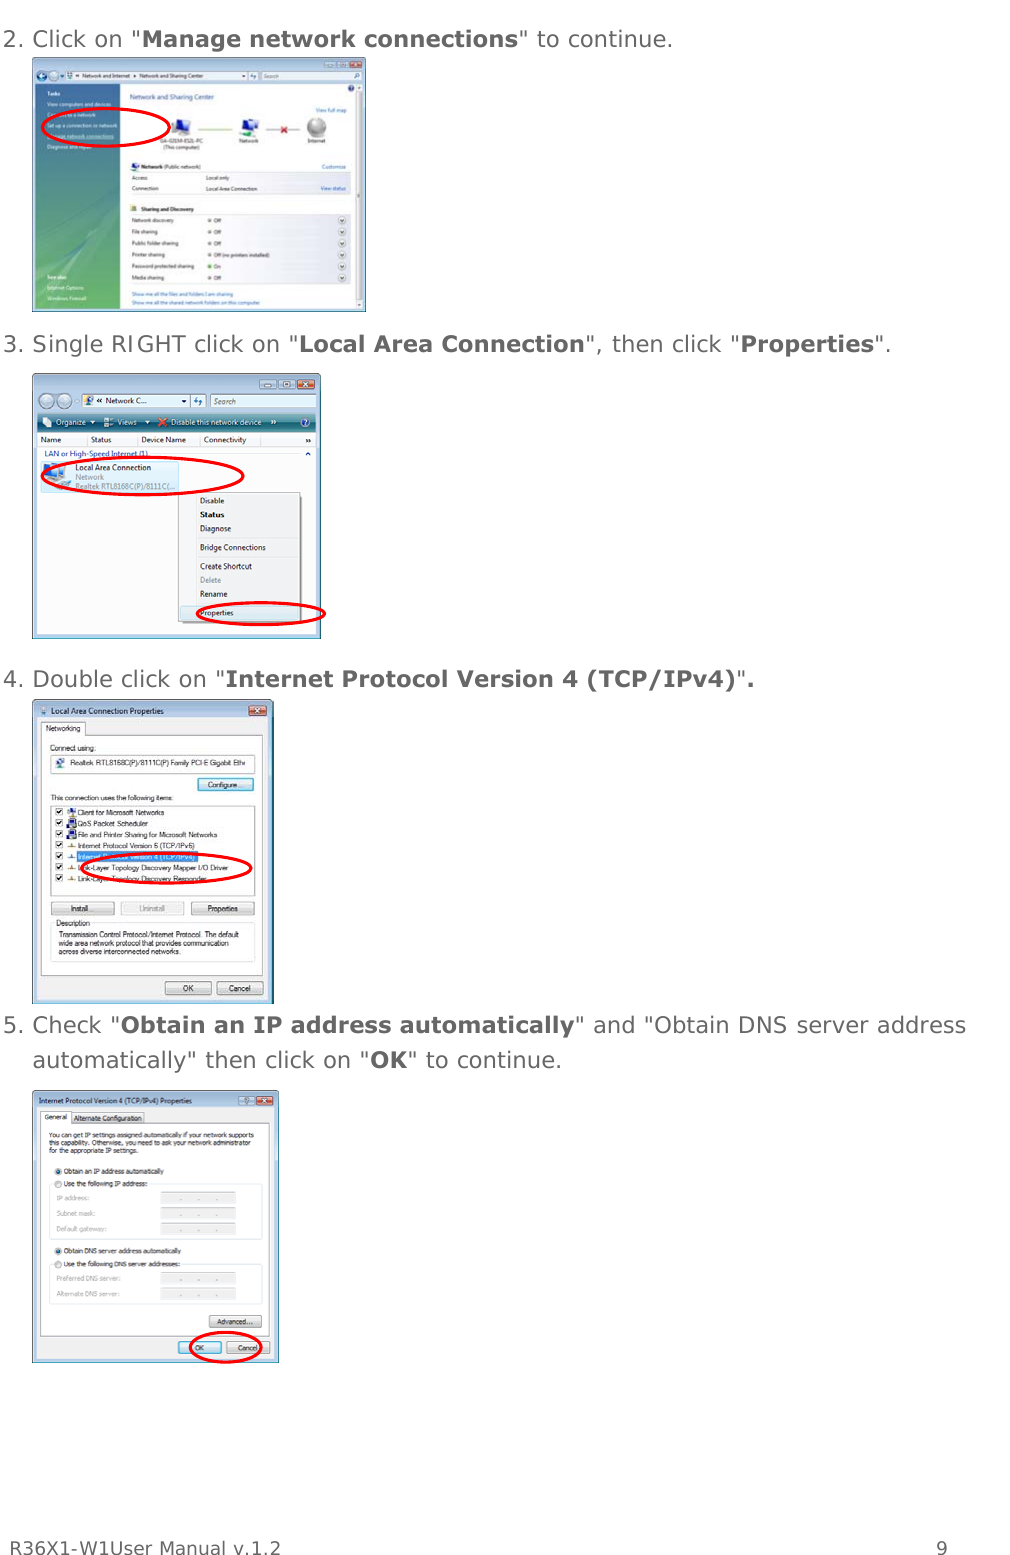           R36X1-W1User Manual v.1.2    9  2. Click on &quot;Manage network connections&quot; to continue.  3. Single RIGHT click on &quot;Local Area Connection&quot;, then click &quot;Properties&quot;.  4. Double click on &quot;Internet Protocol Version 4 (TCP/IPv4)&quot;.  5. Check &quot;Obtain an IP address automatically&quot; and &quot;Obtain DNS server address automatically&quot; then click on &quot;OK&quot; to continue.    